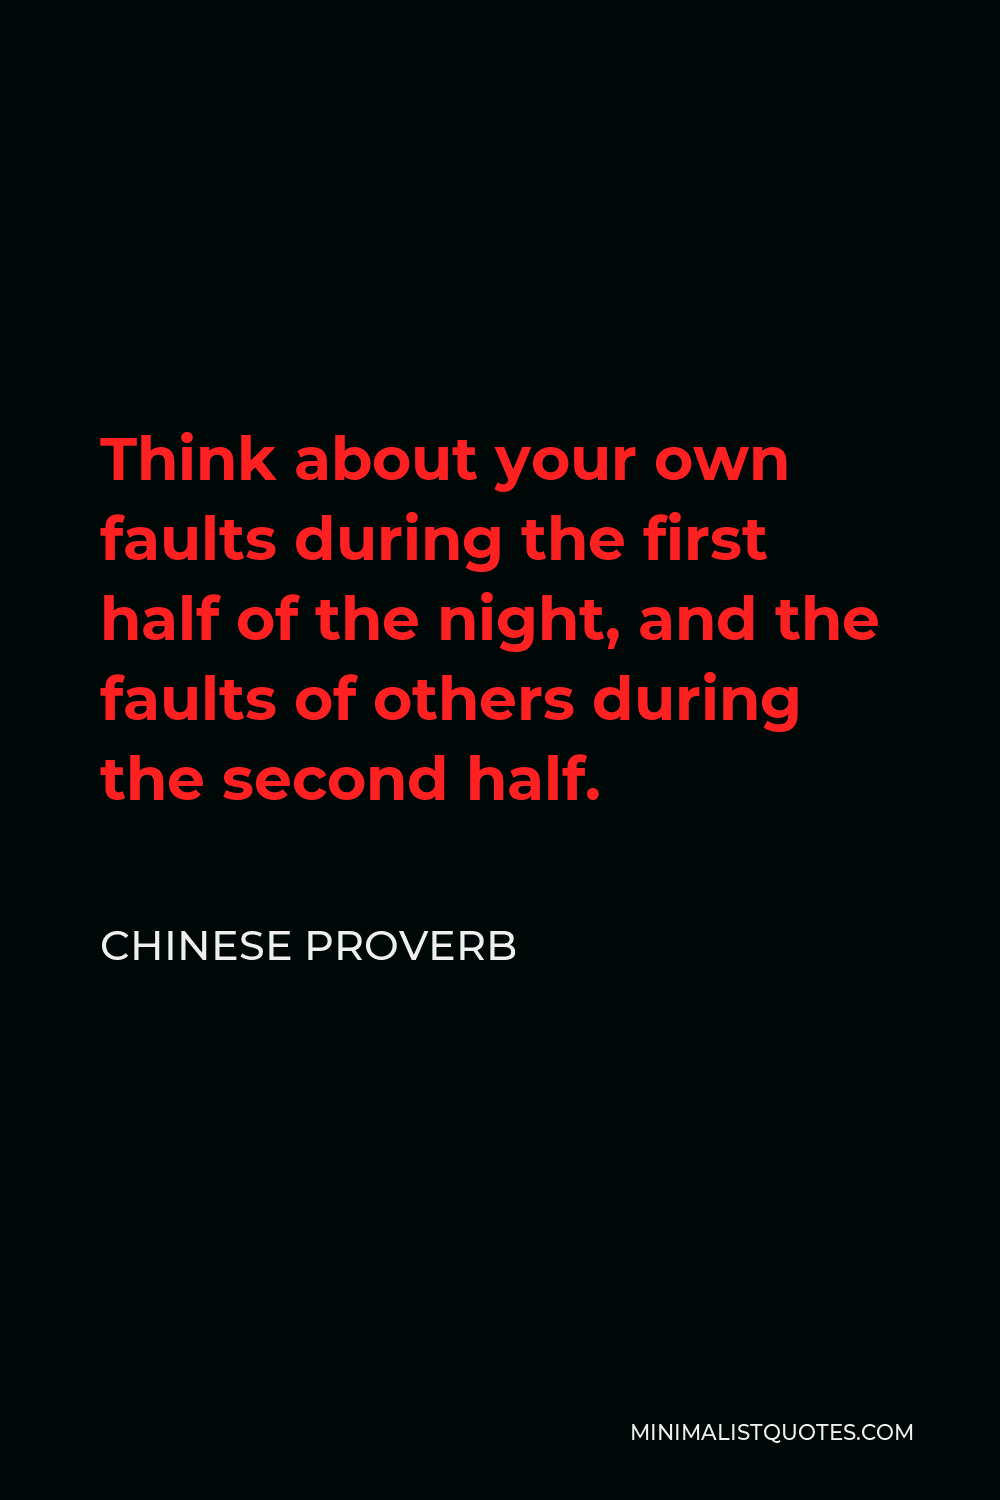 Chinese Proverb Quote - Think about your own faults during the first half of the night, and the faults of others during the second half.